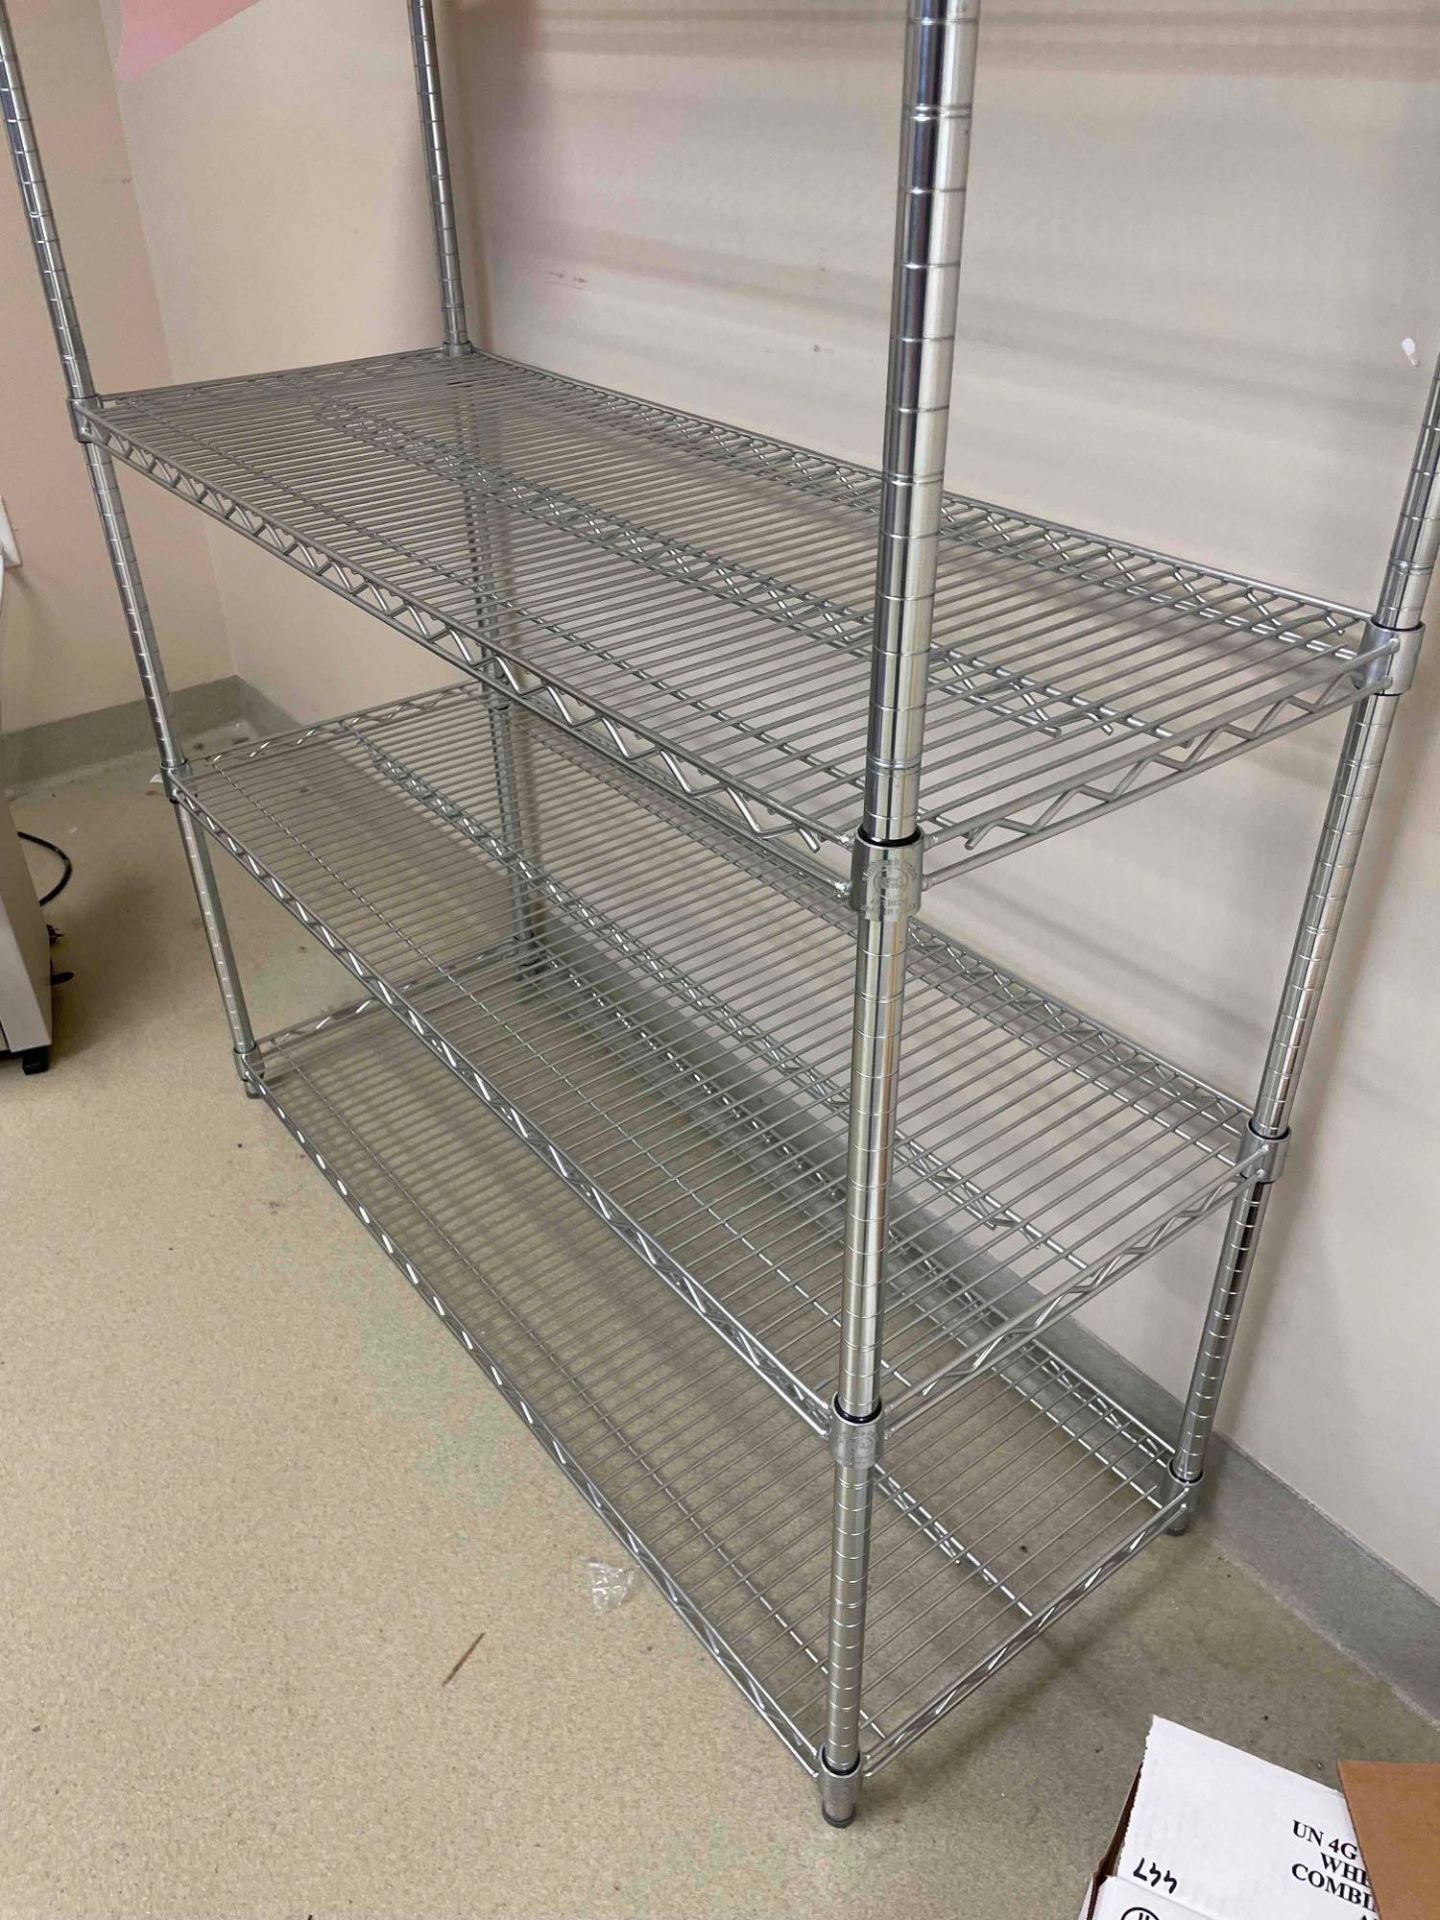 5-Tier Wire Shelving Units - Image 3 of 3